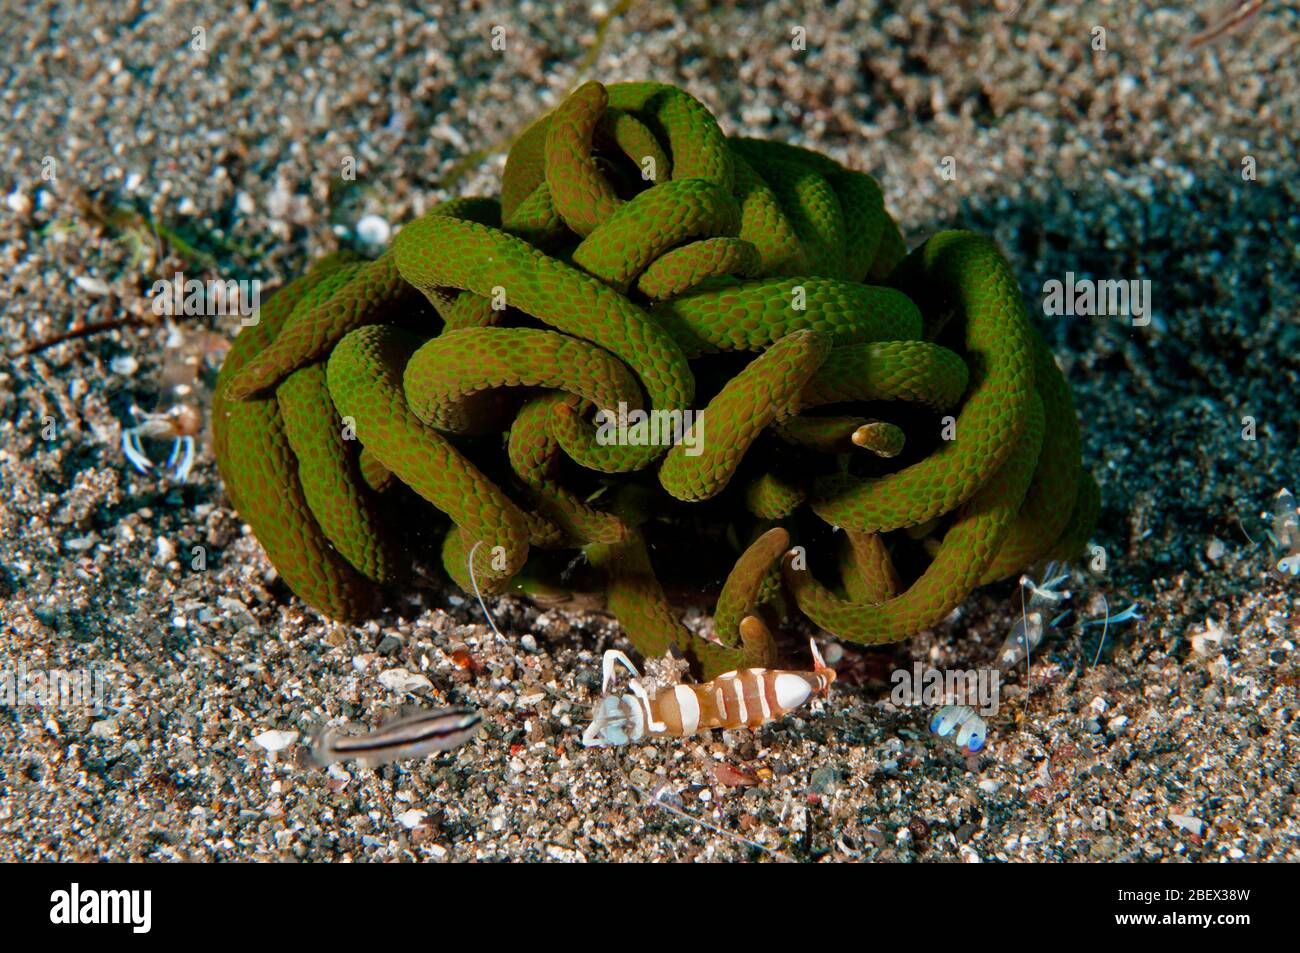 Commensal shrimp, Periclimenes magnificus, on an unidentified colonial ascidian, Flores Indonesia. Stock Photo